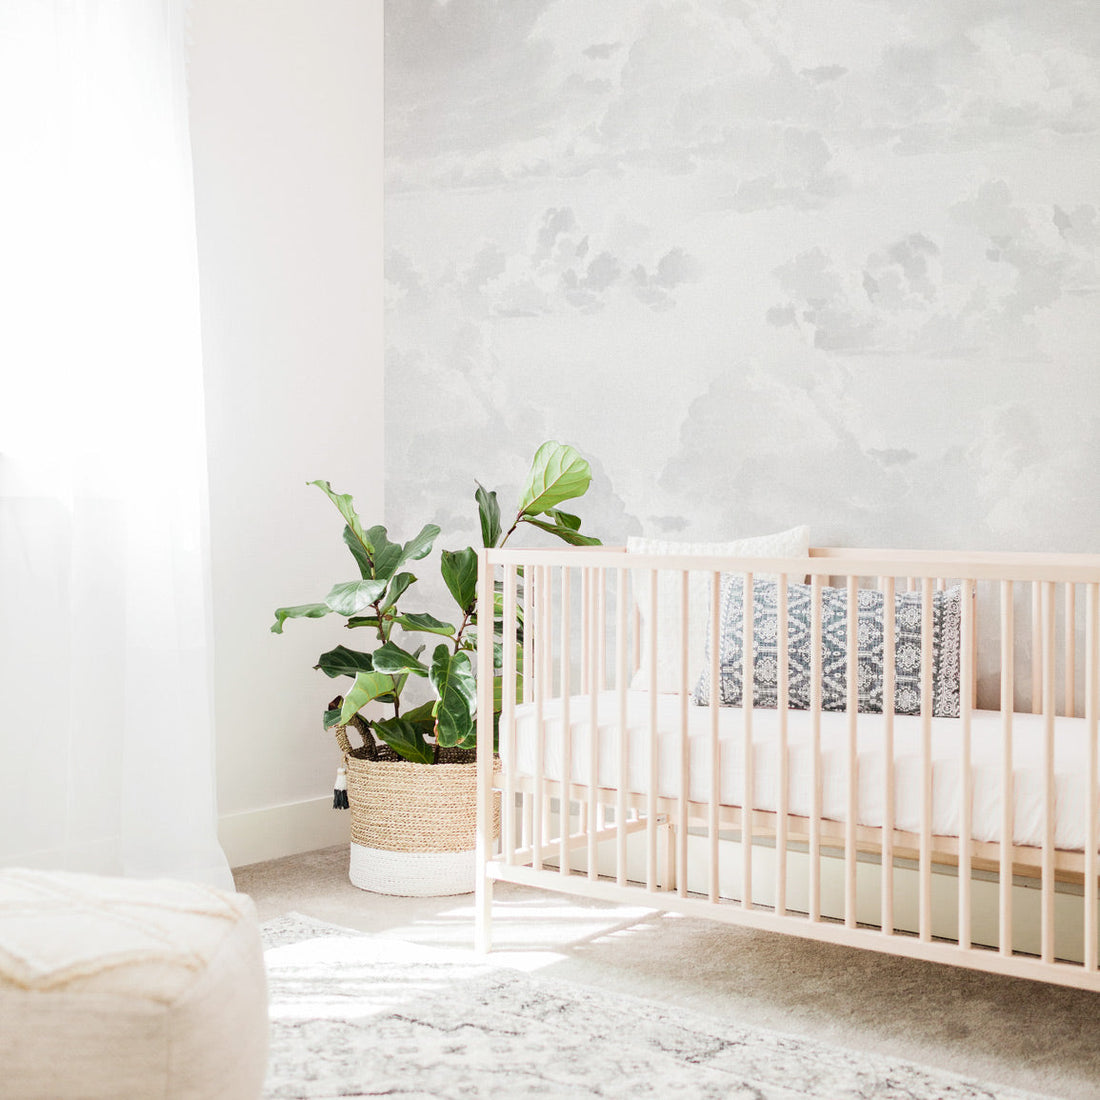 Gender neutral nursery interior with coastal style and vintage clouds removable wall mural wallpaper